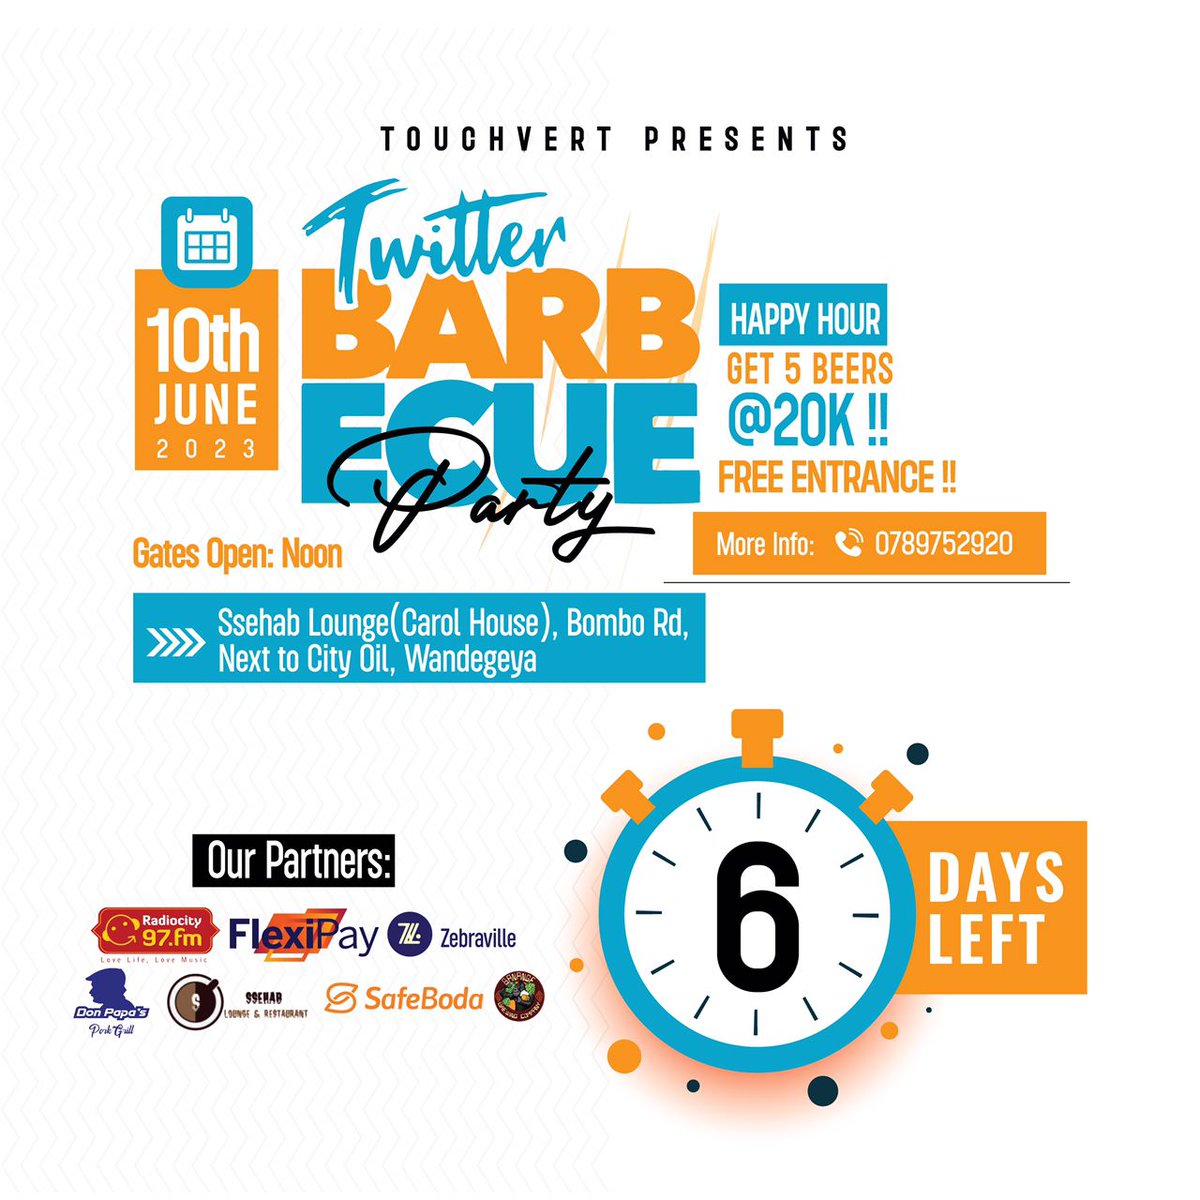 Next sato is #TwitterBarbecueParty day.